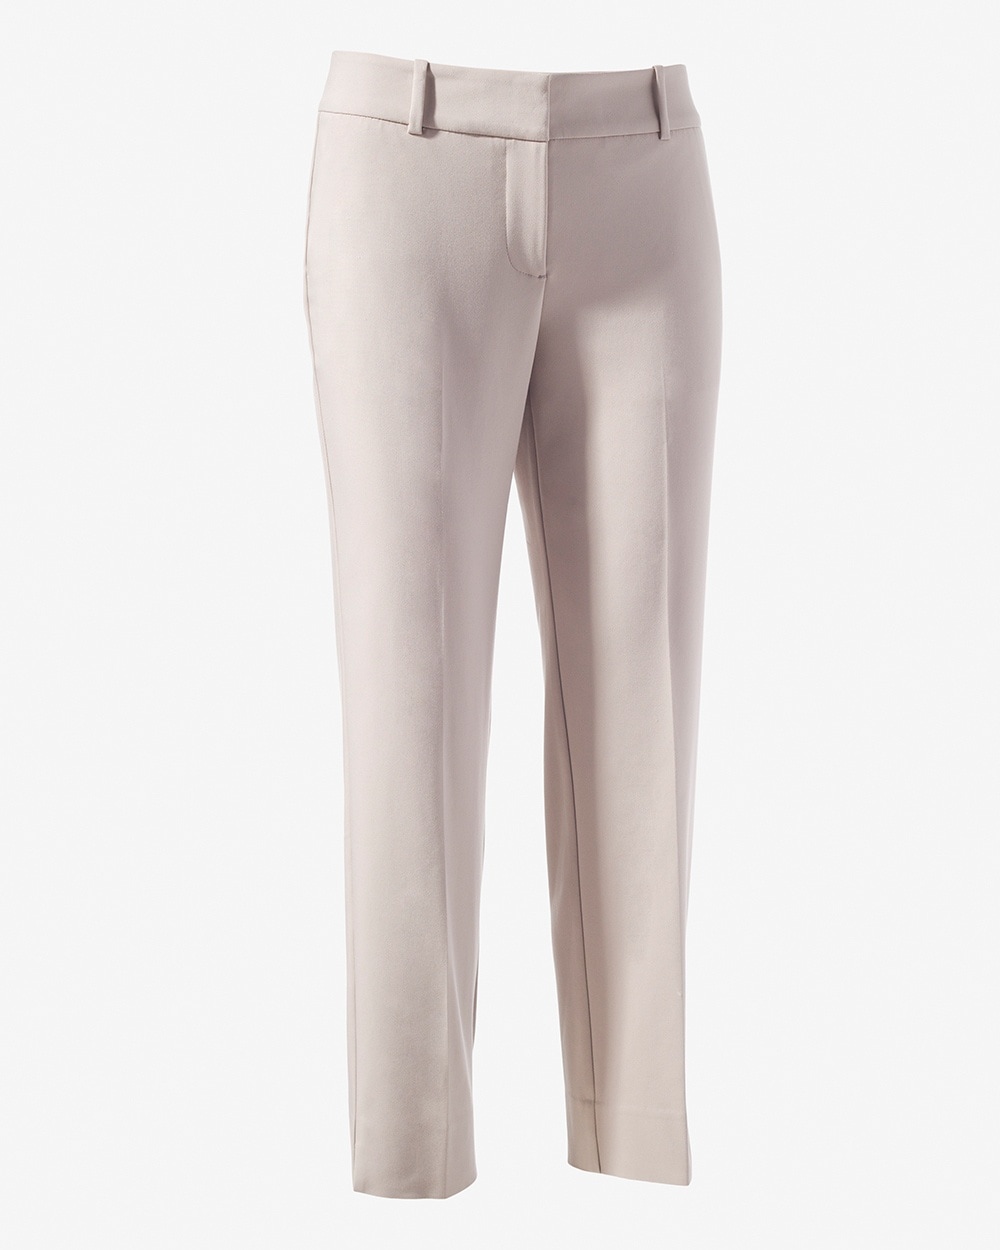 Fabulously Slimming Straight Ankle Pants